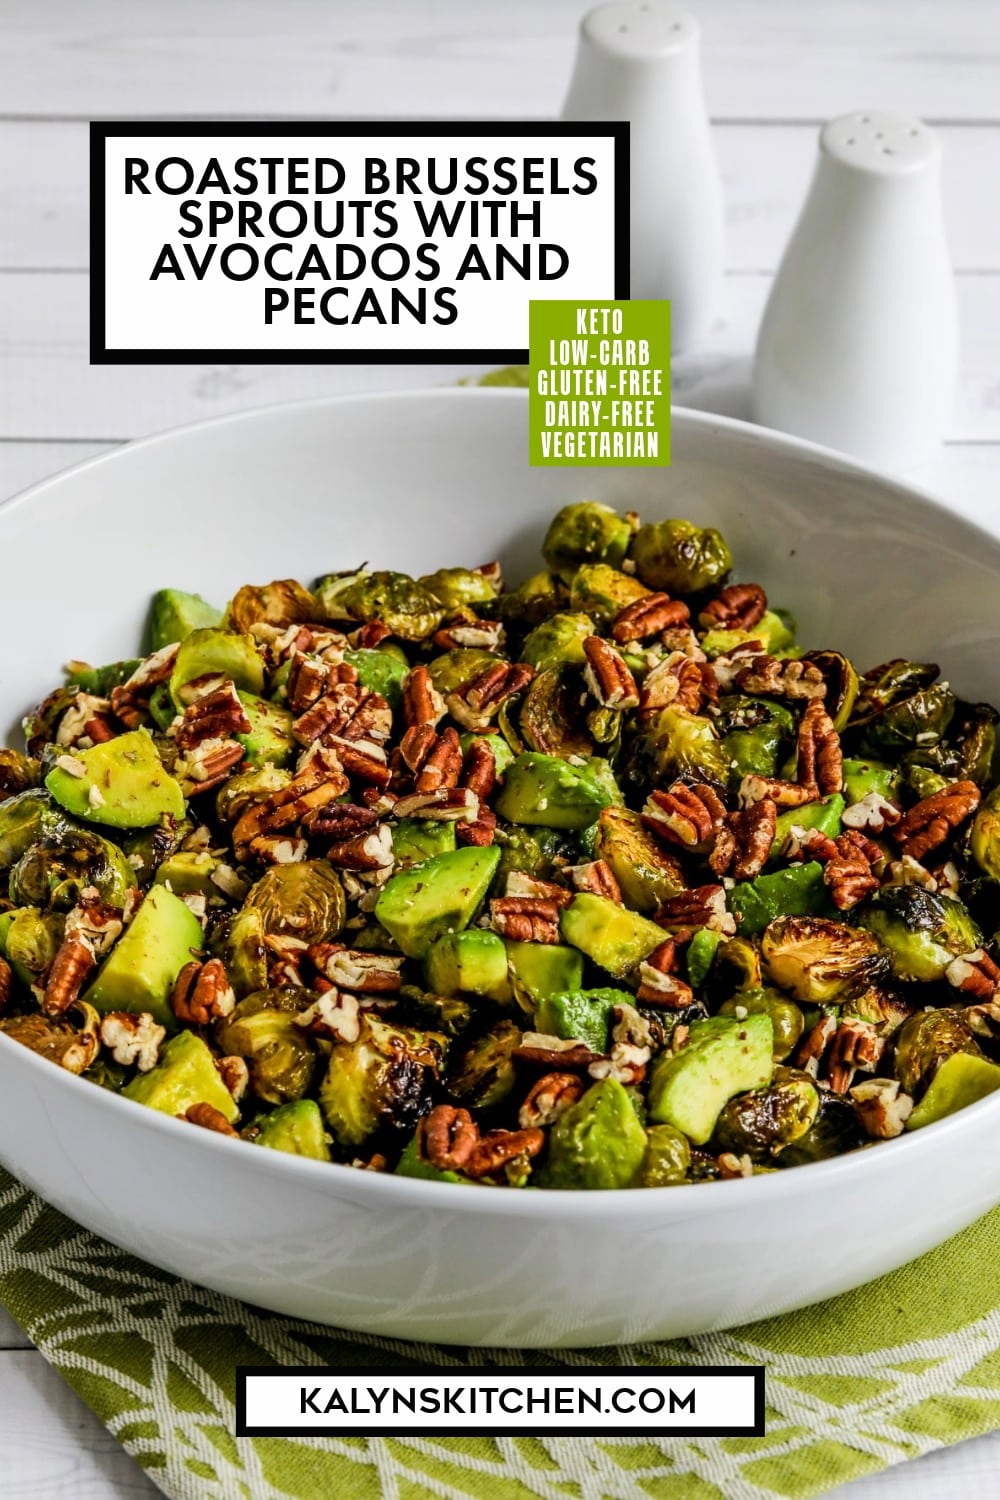 Pinterest image of Roasted Brussels Sprouts with Avocados and Pecans